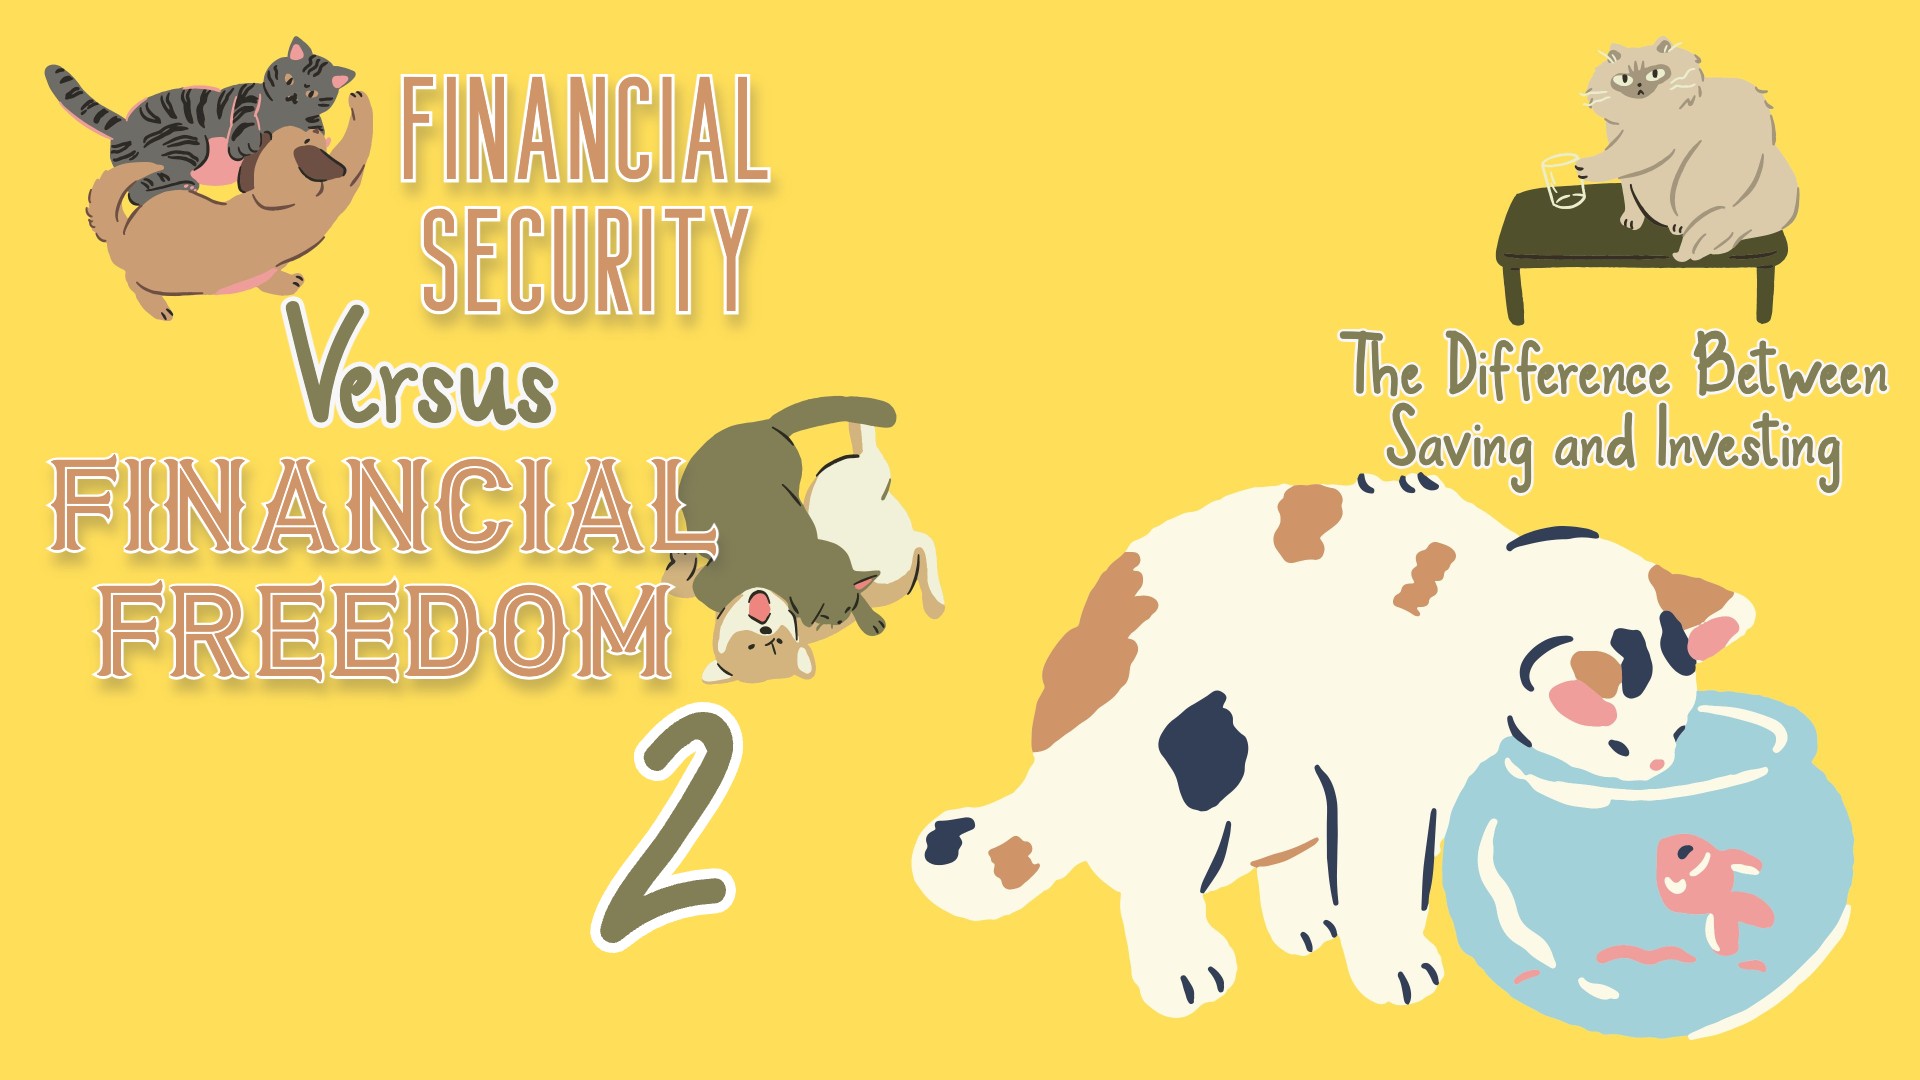 Financial Security vs Financial Freedom 2